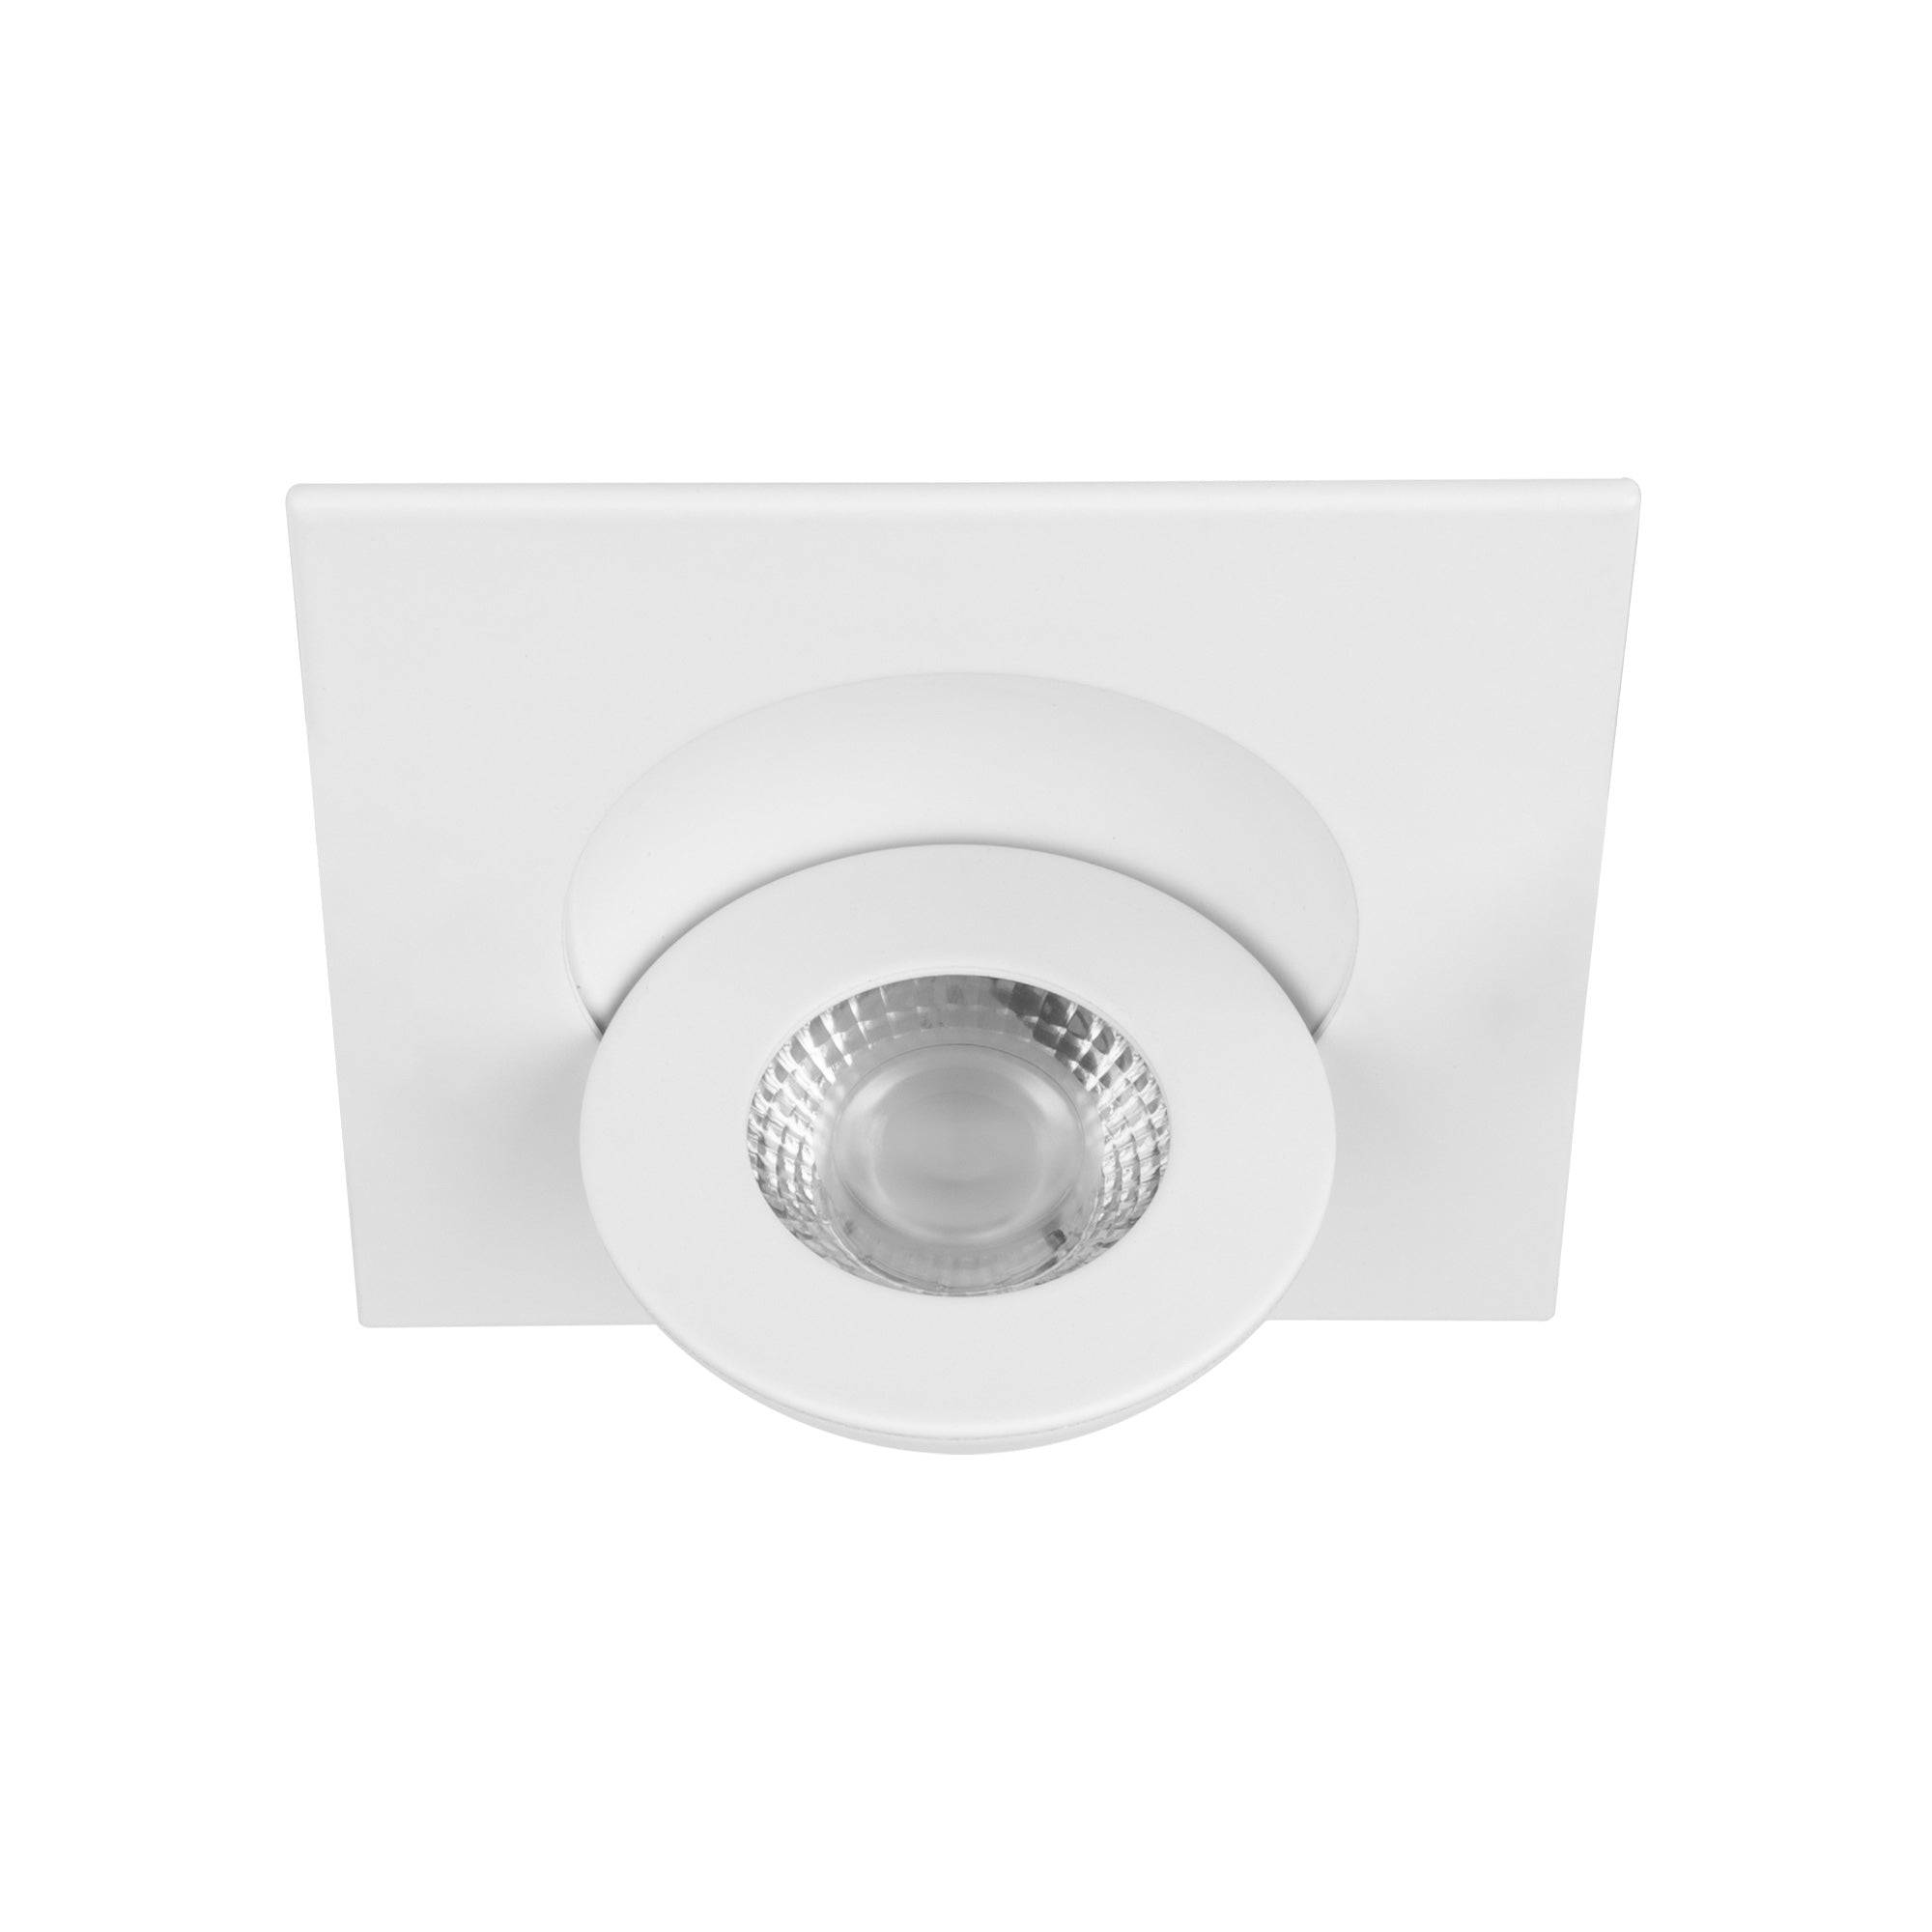 Lotos 2" LED 1-Light Square Adjustable Recessed Kit (Pack of 24)